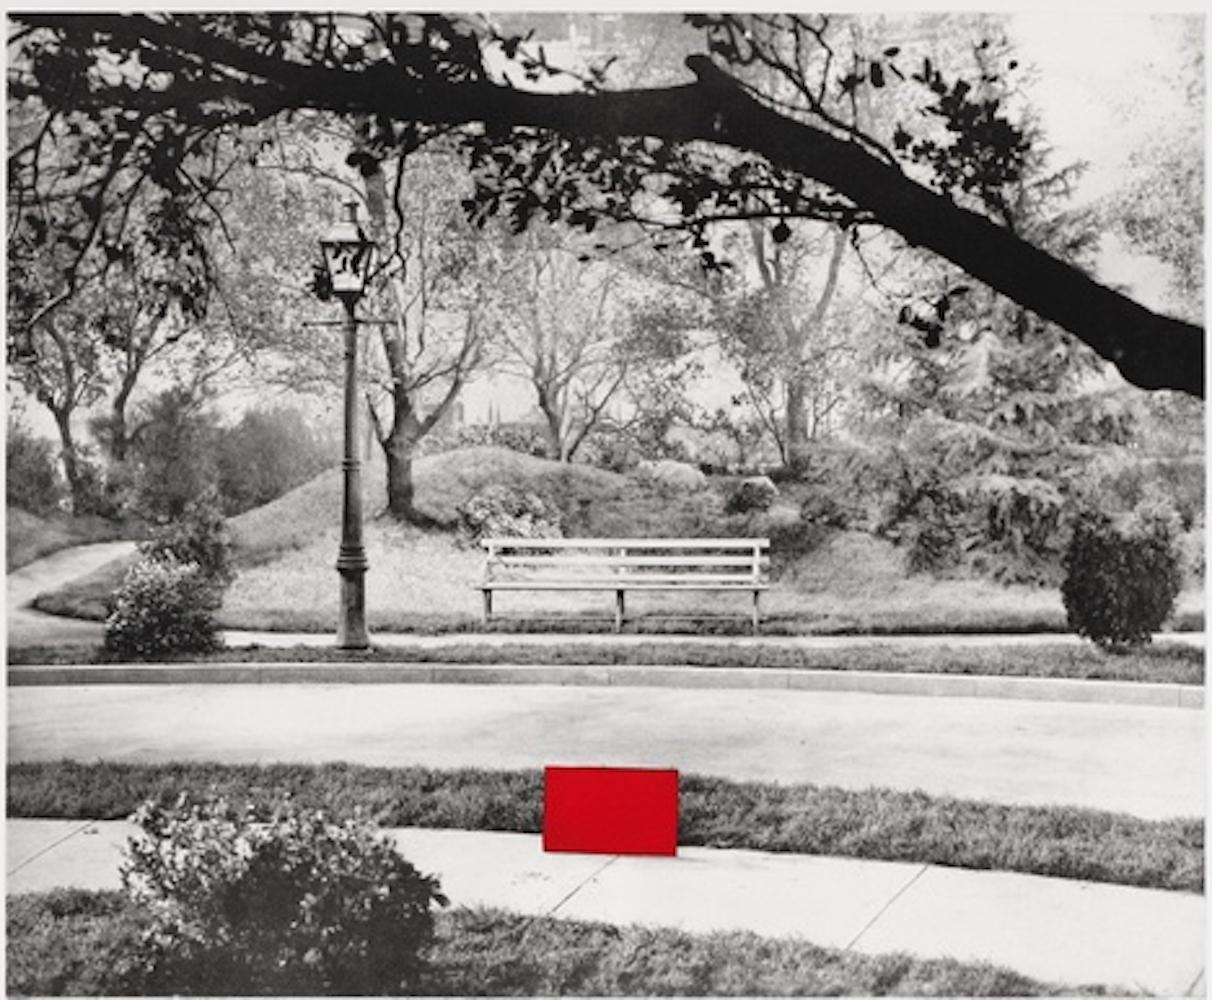 John Baldessari (June 17, 1931 - January 2, 2020, American)
Two Sets (One with Bench)
1989-1990
Photogravure with aquatint
47 3/8 29 5/8 in.
Artist's Proof (A.P)
Pencil signed and numbered

A pioneering force in Conceptual art, John Baldessari